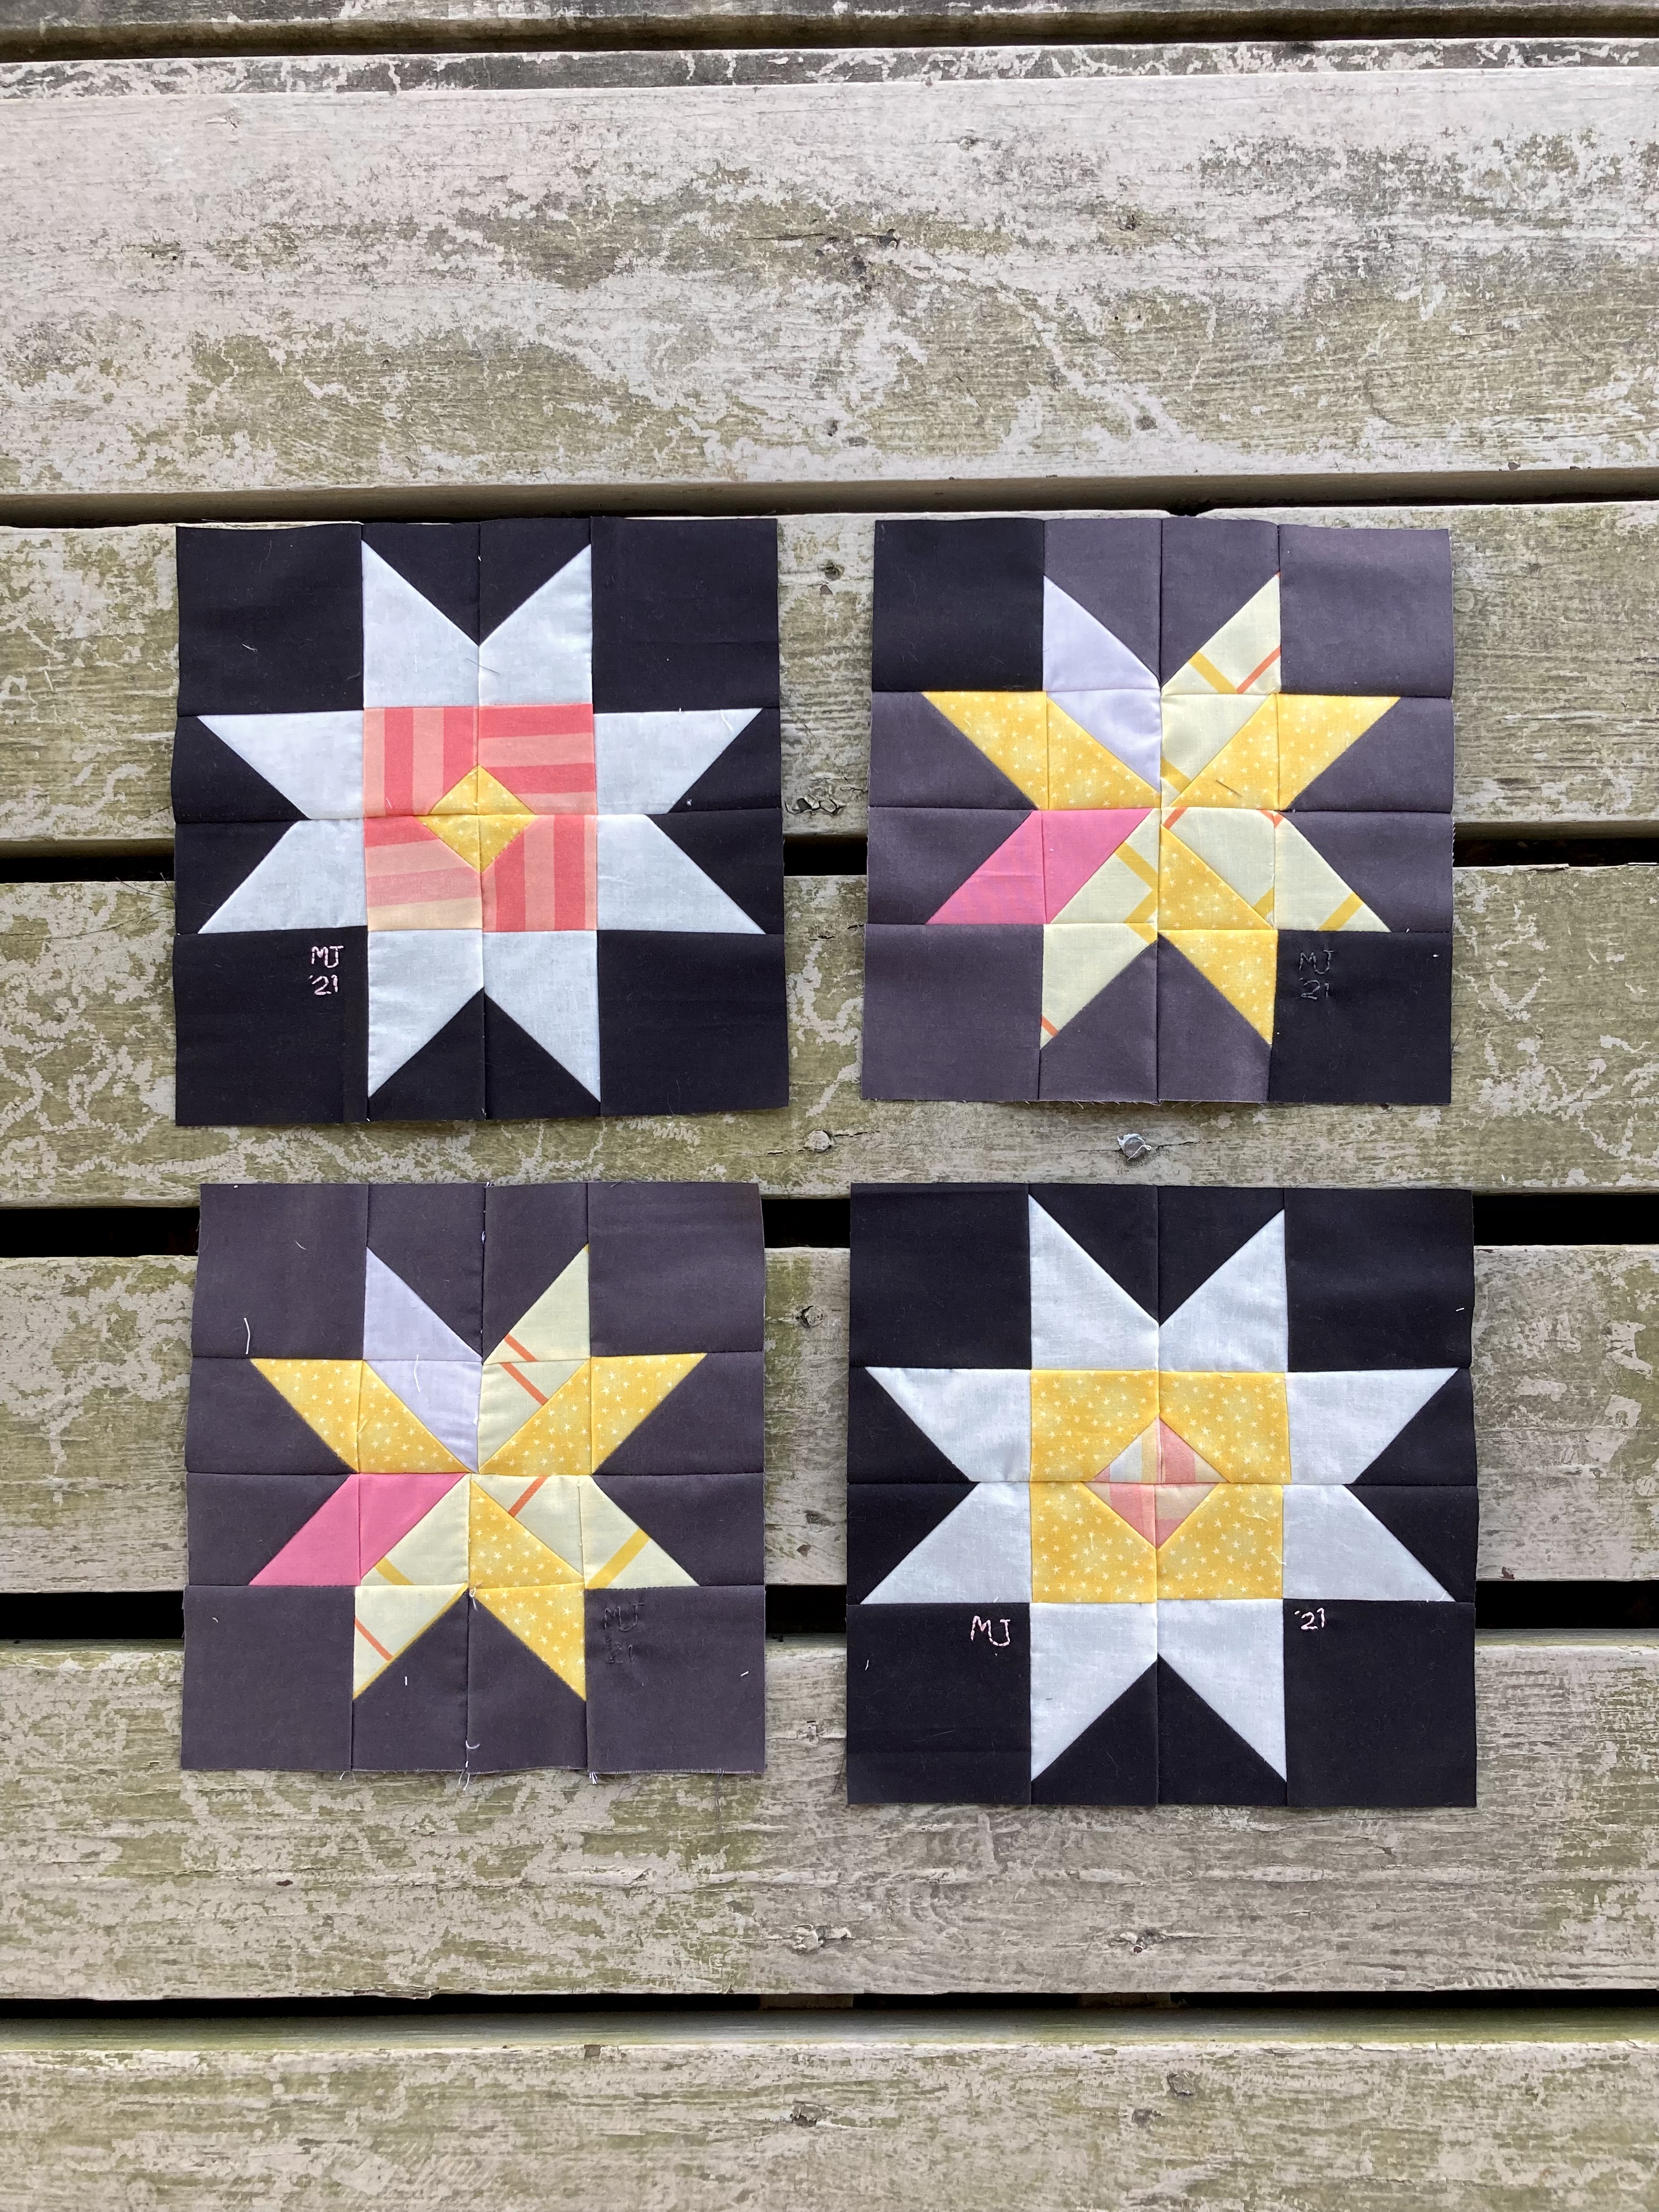 four quilt squares with star patterns in black, white, yellow, and pink